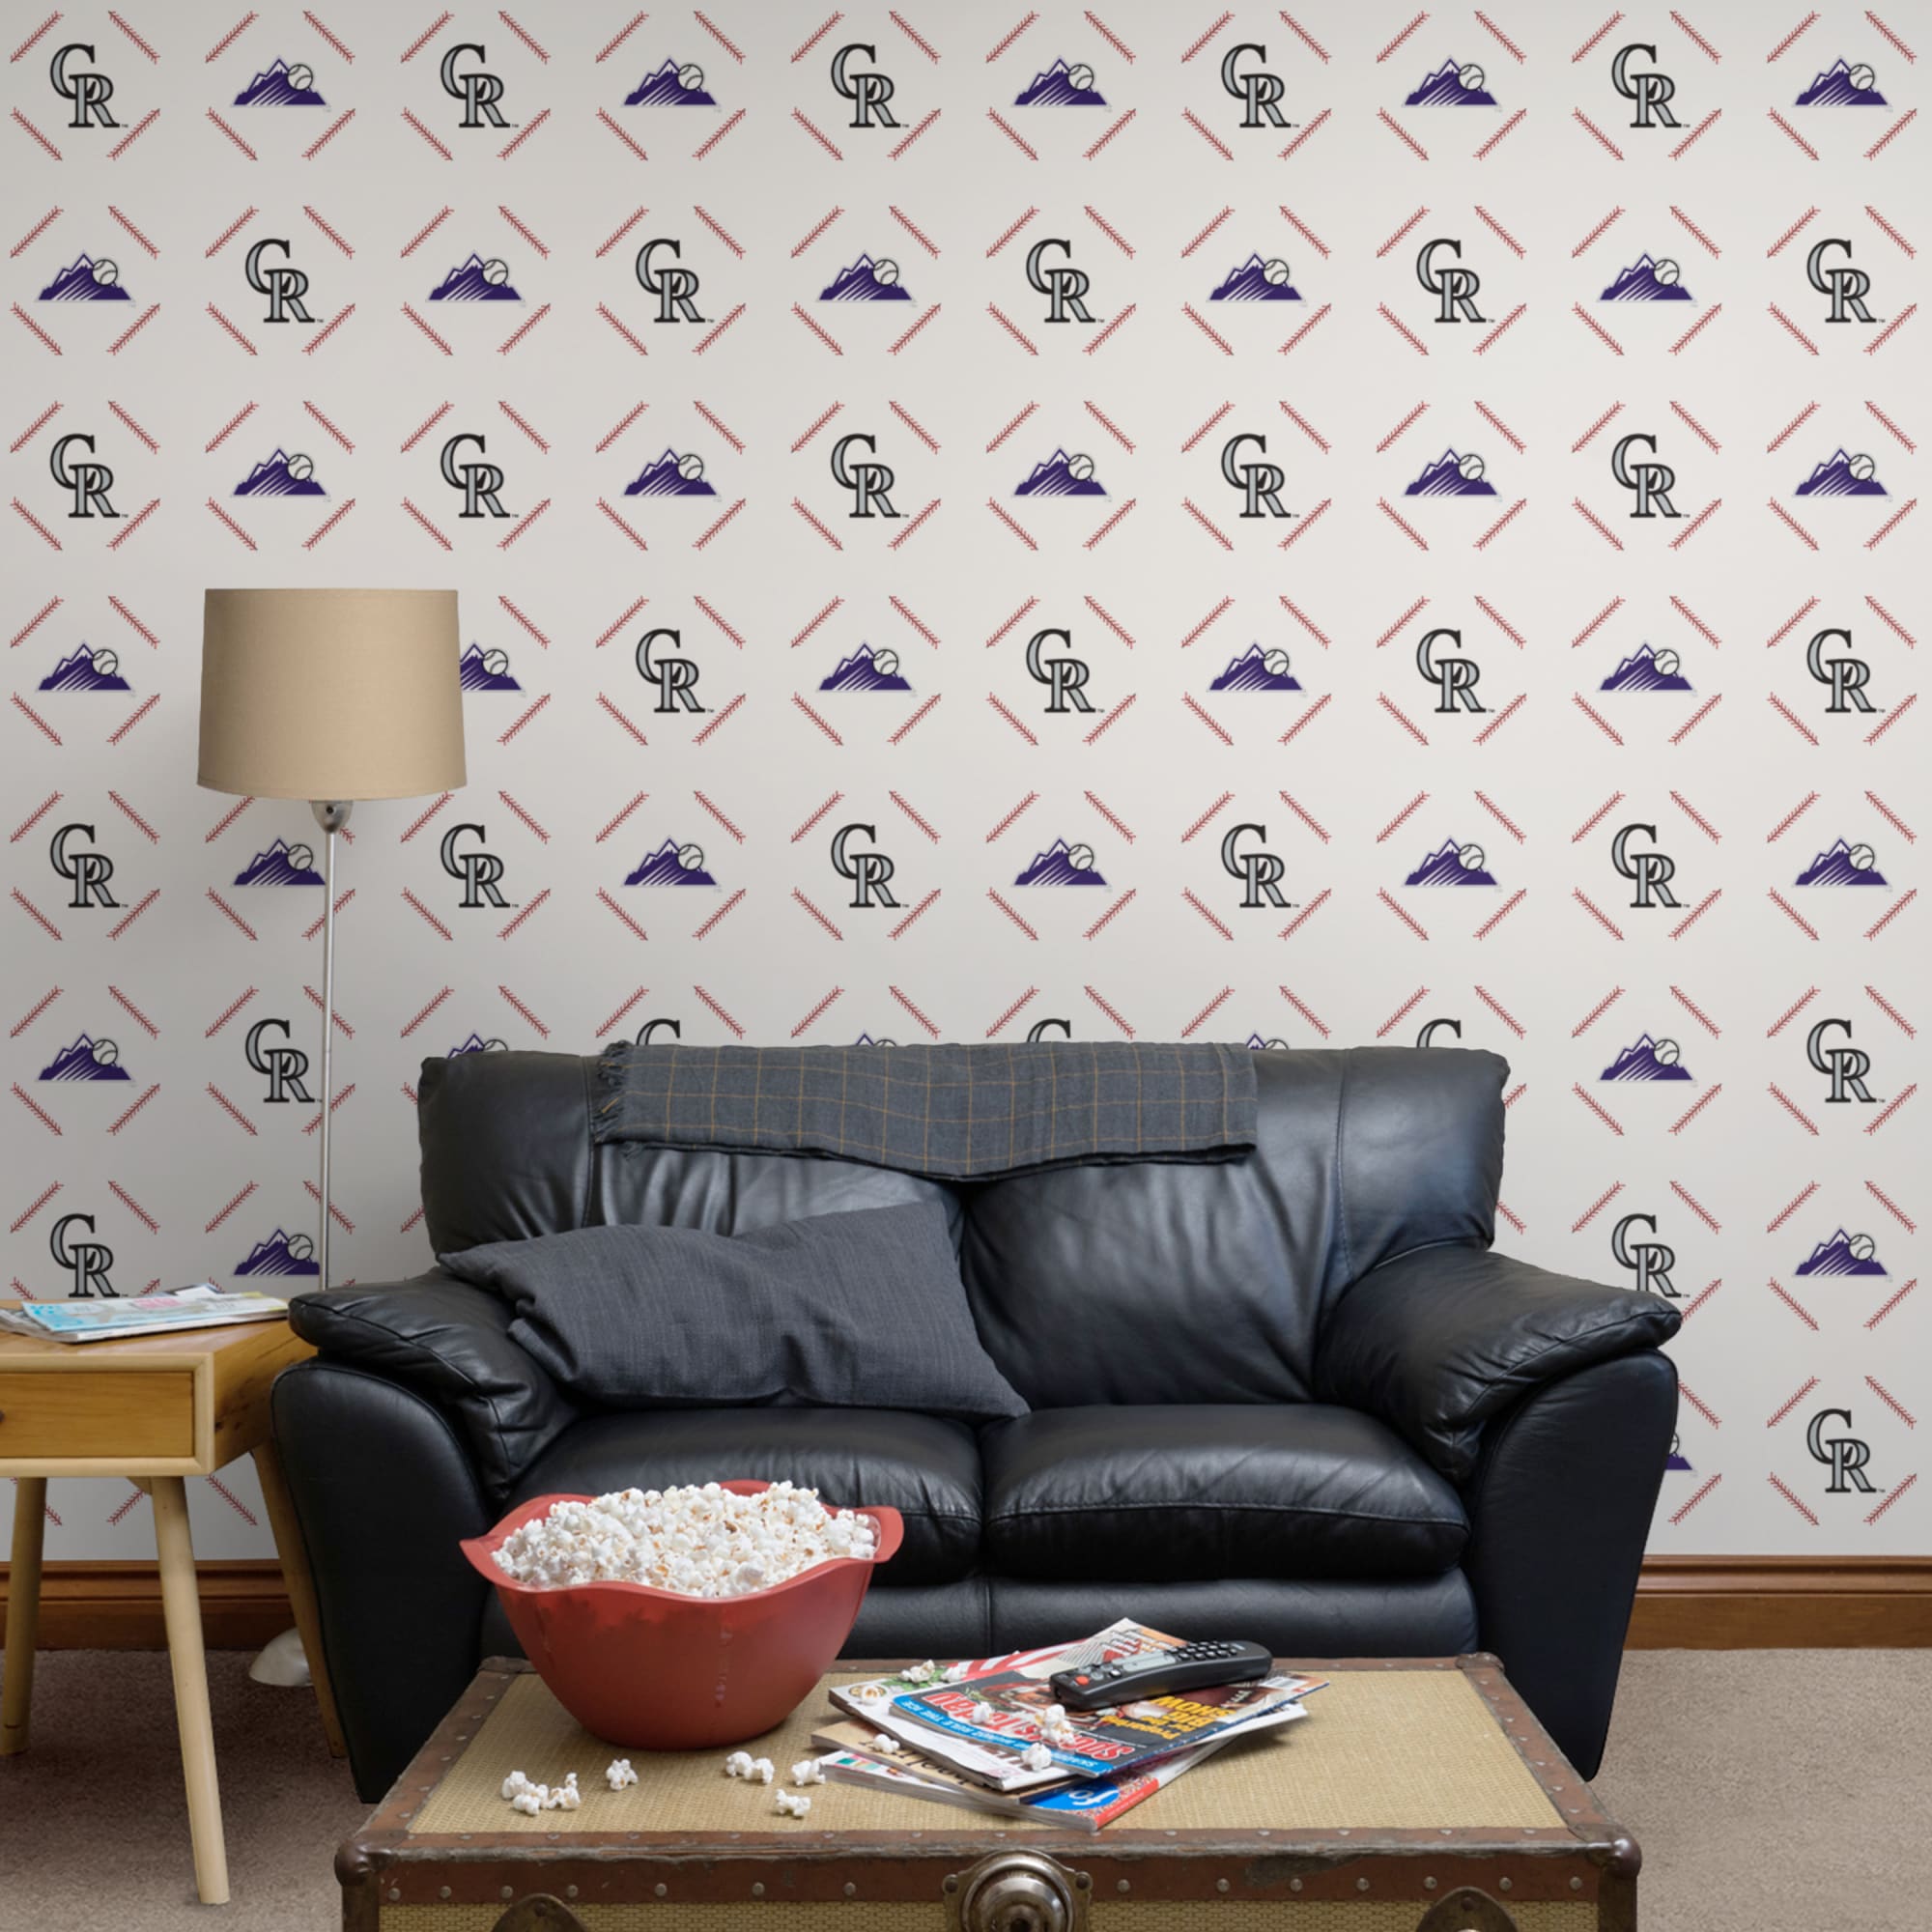 Colorado Rockies: Stitch Pattern - Officially Licensed Removable Wallpaper 12" x 12" Sample by Fathead